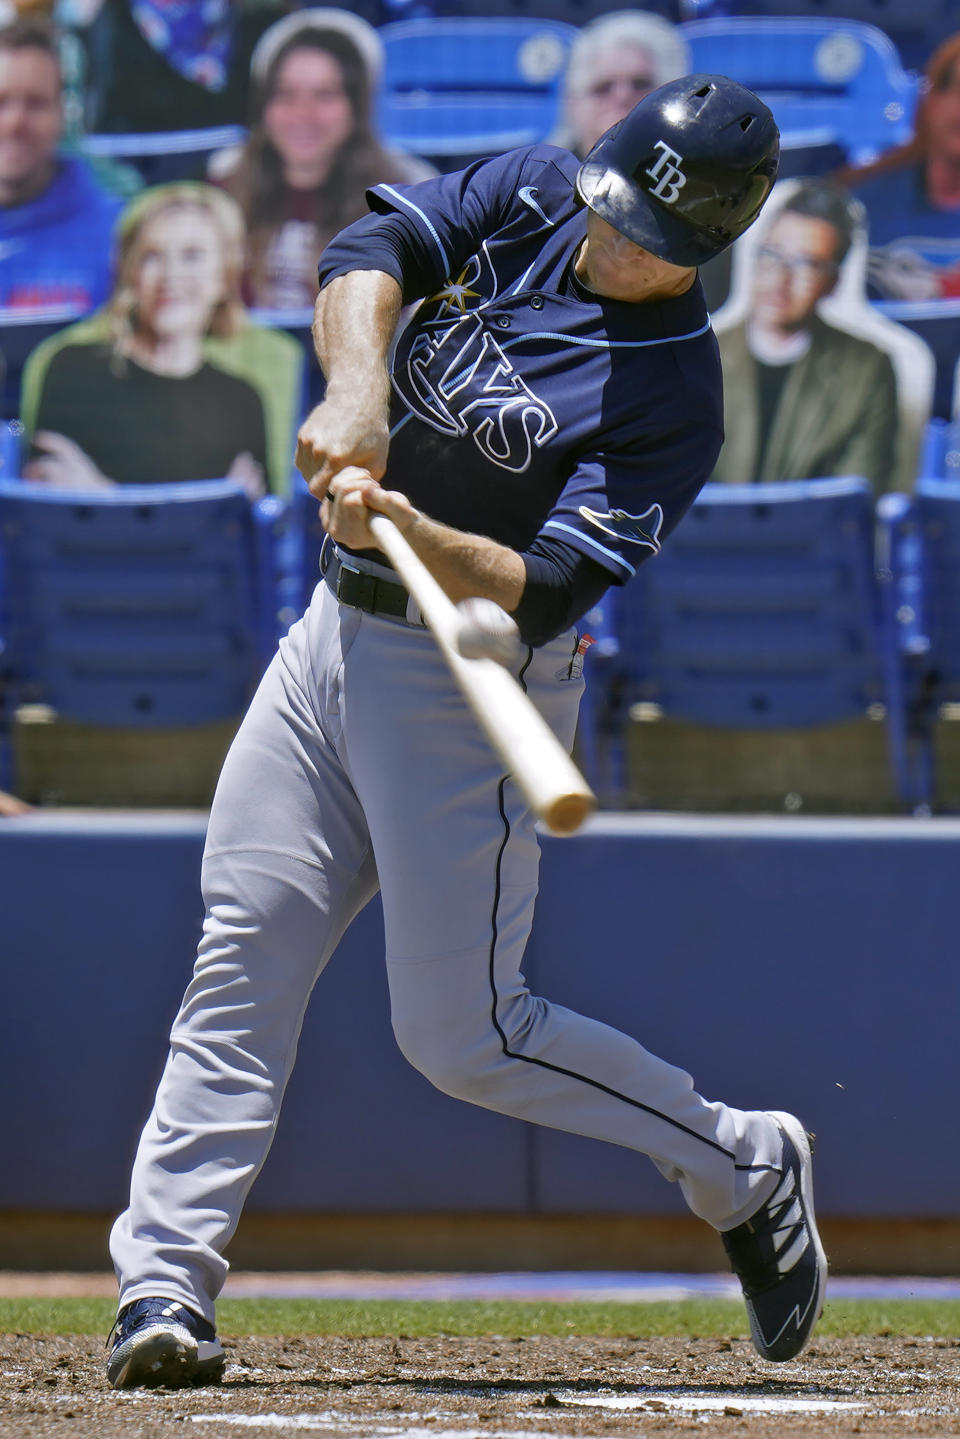 Tampa Bay Rays' Joey Wendle connects for a grand slam off Toronto Blue Jays starting pitcher Trent Thornton during the first inning of a baseball game Monday, May 24, 2021, in Dunedin, Fla. (AP Photo/Chris O'Meara)